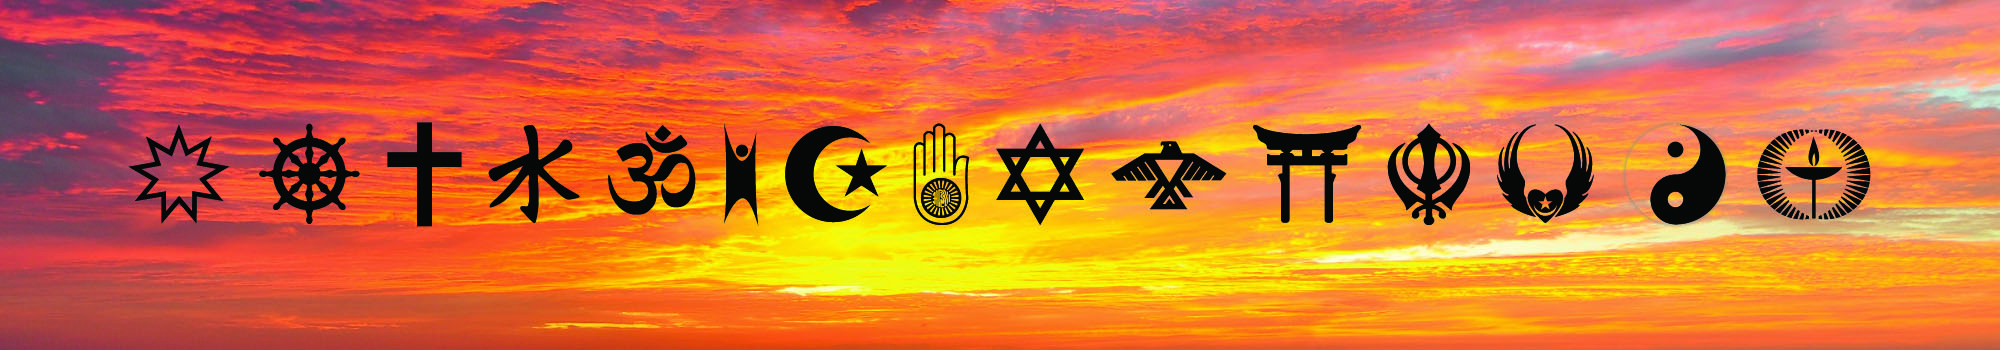 Multiple emblems of faith and religion with sunset background